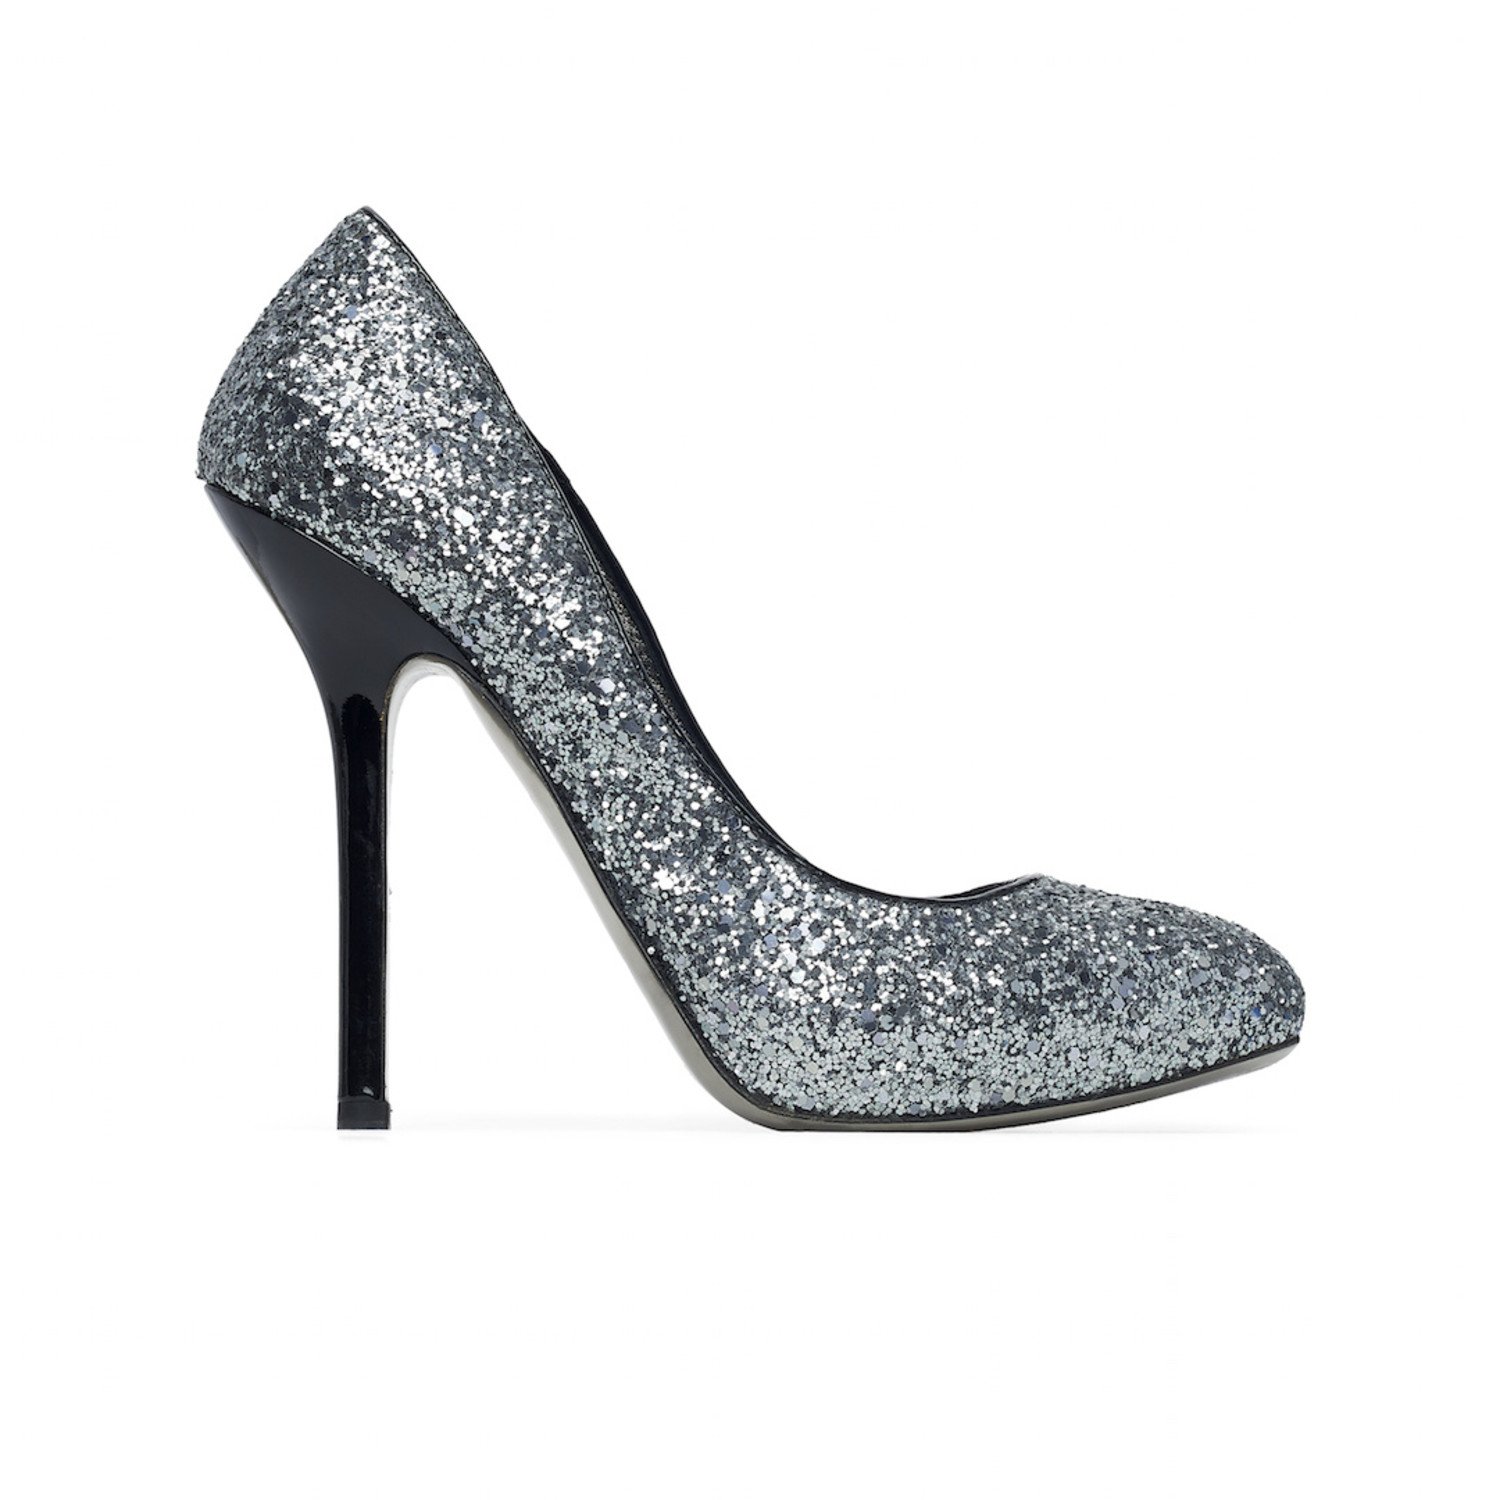 next silver glitter shoes